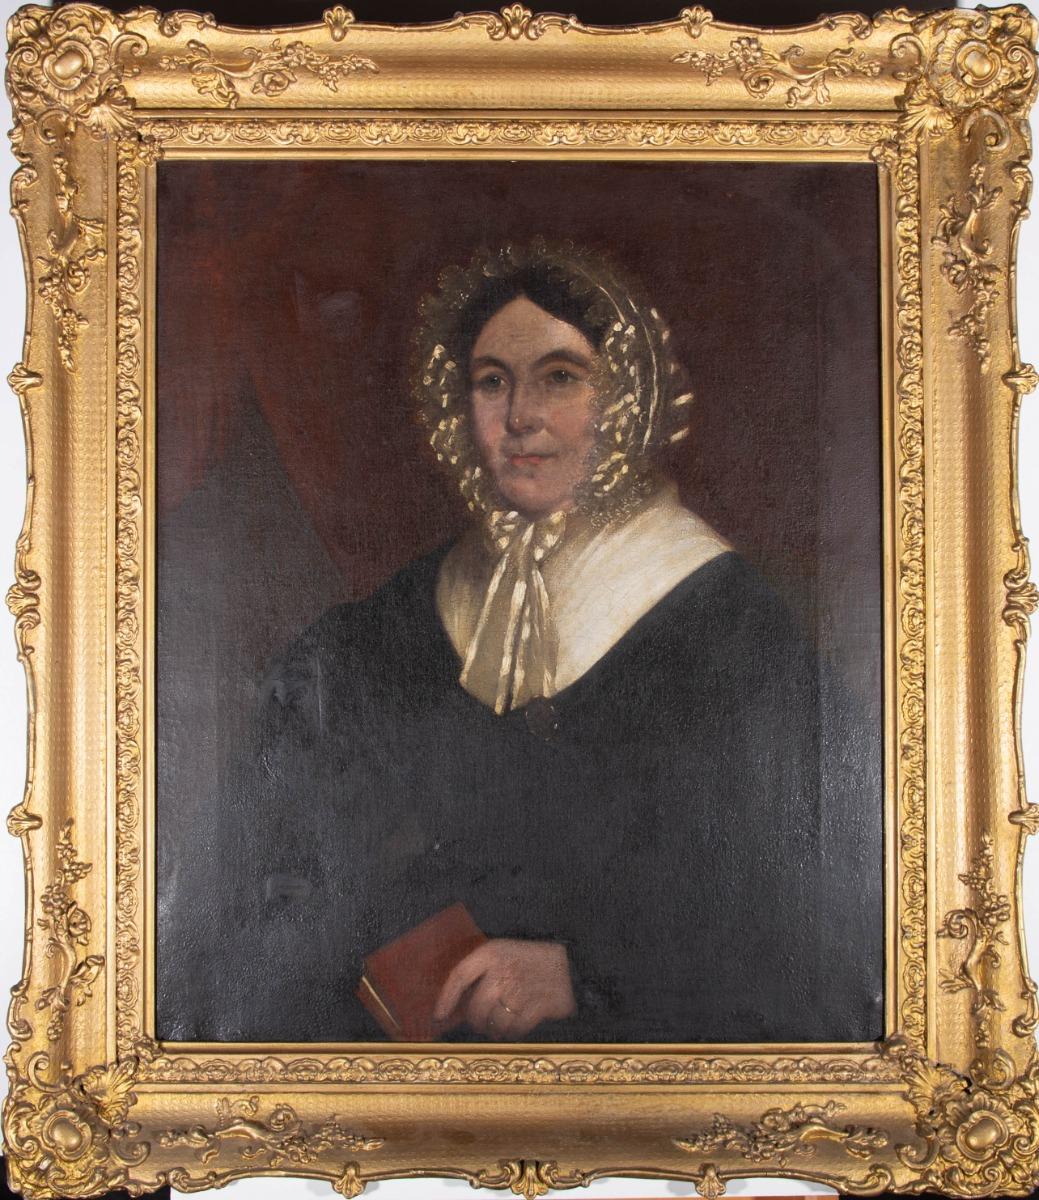 Unknown Portrait Painting - Gilt Framed Early 19th Century Oil - Portrait of a Quaker